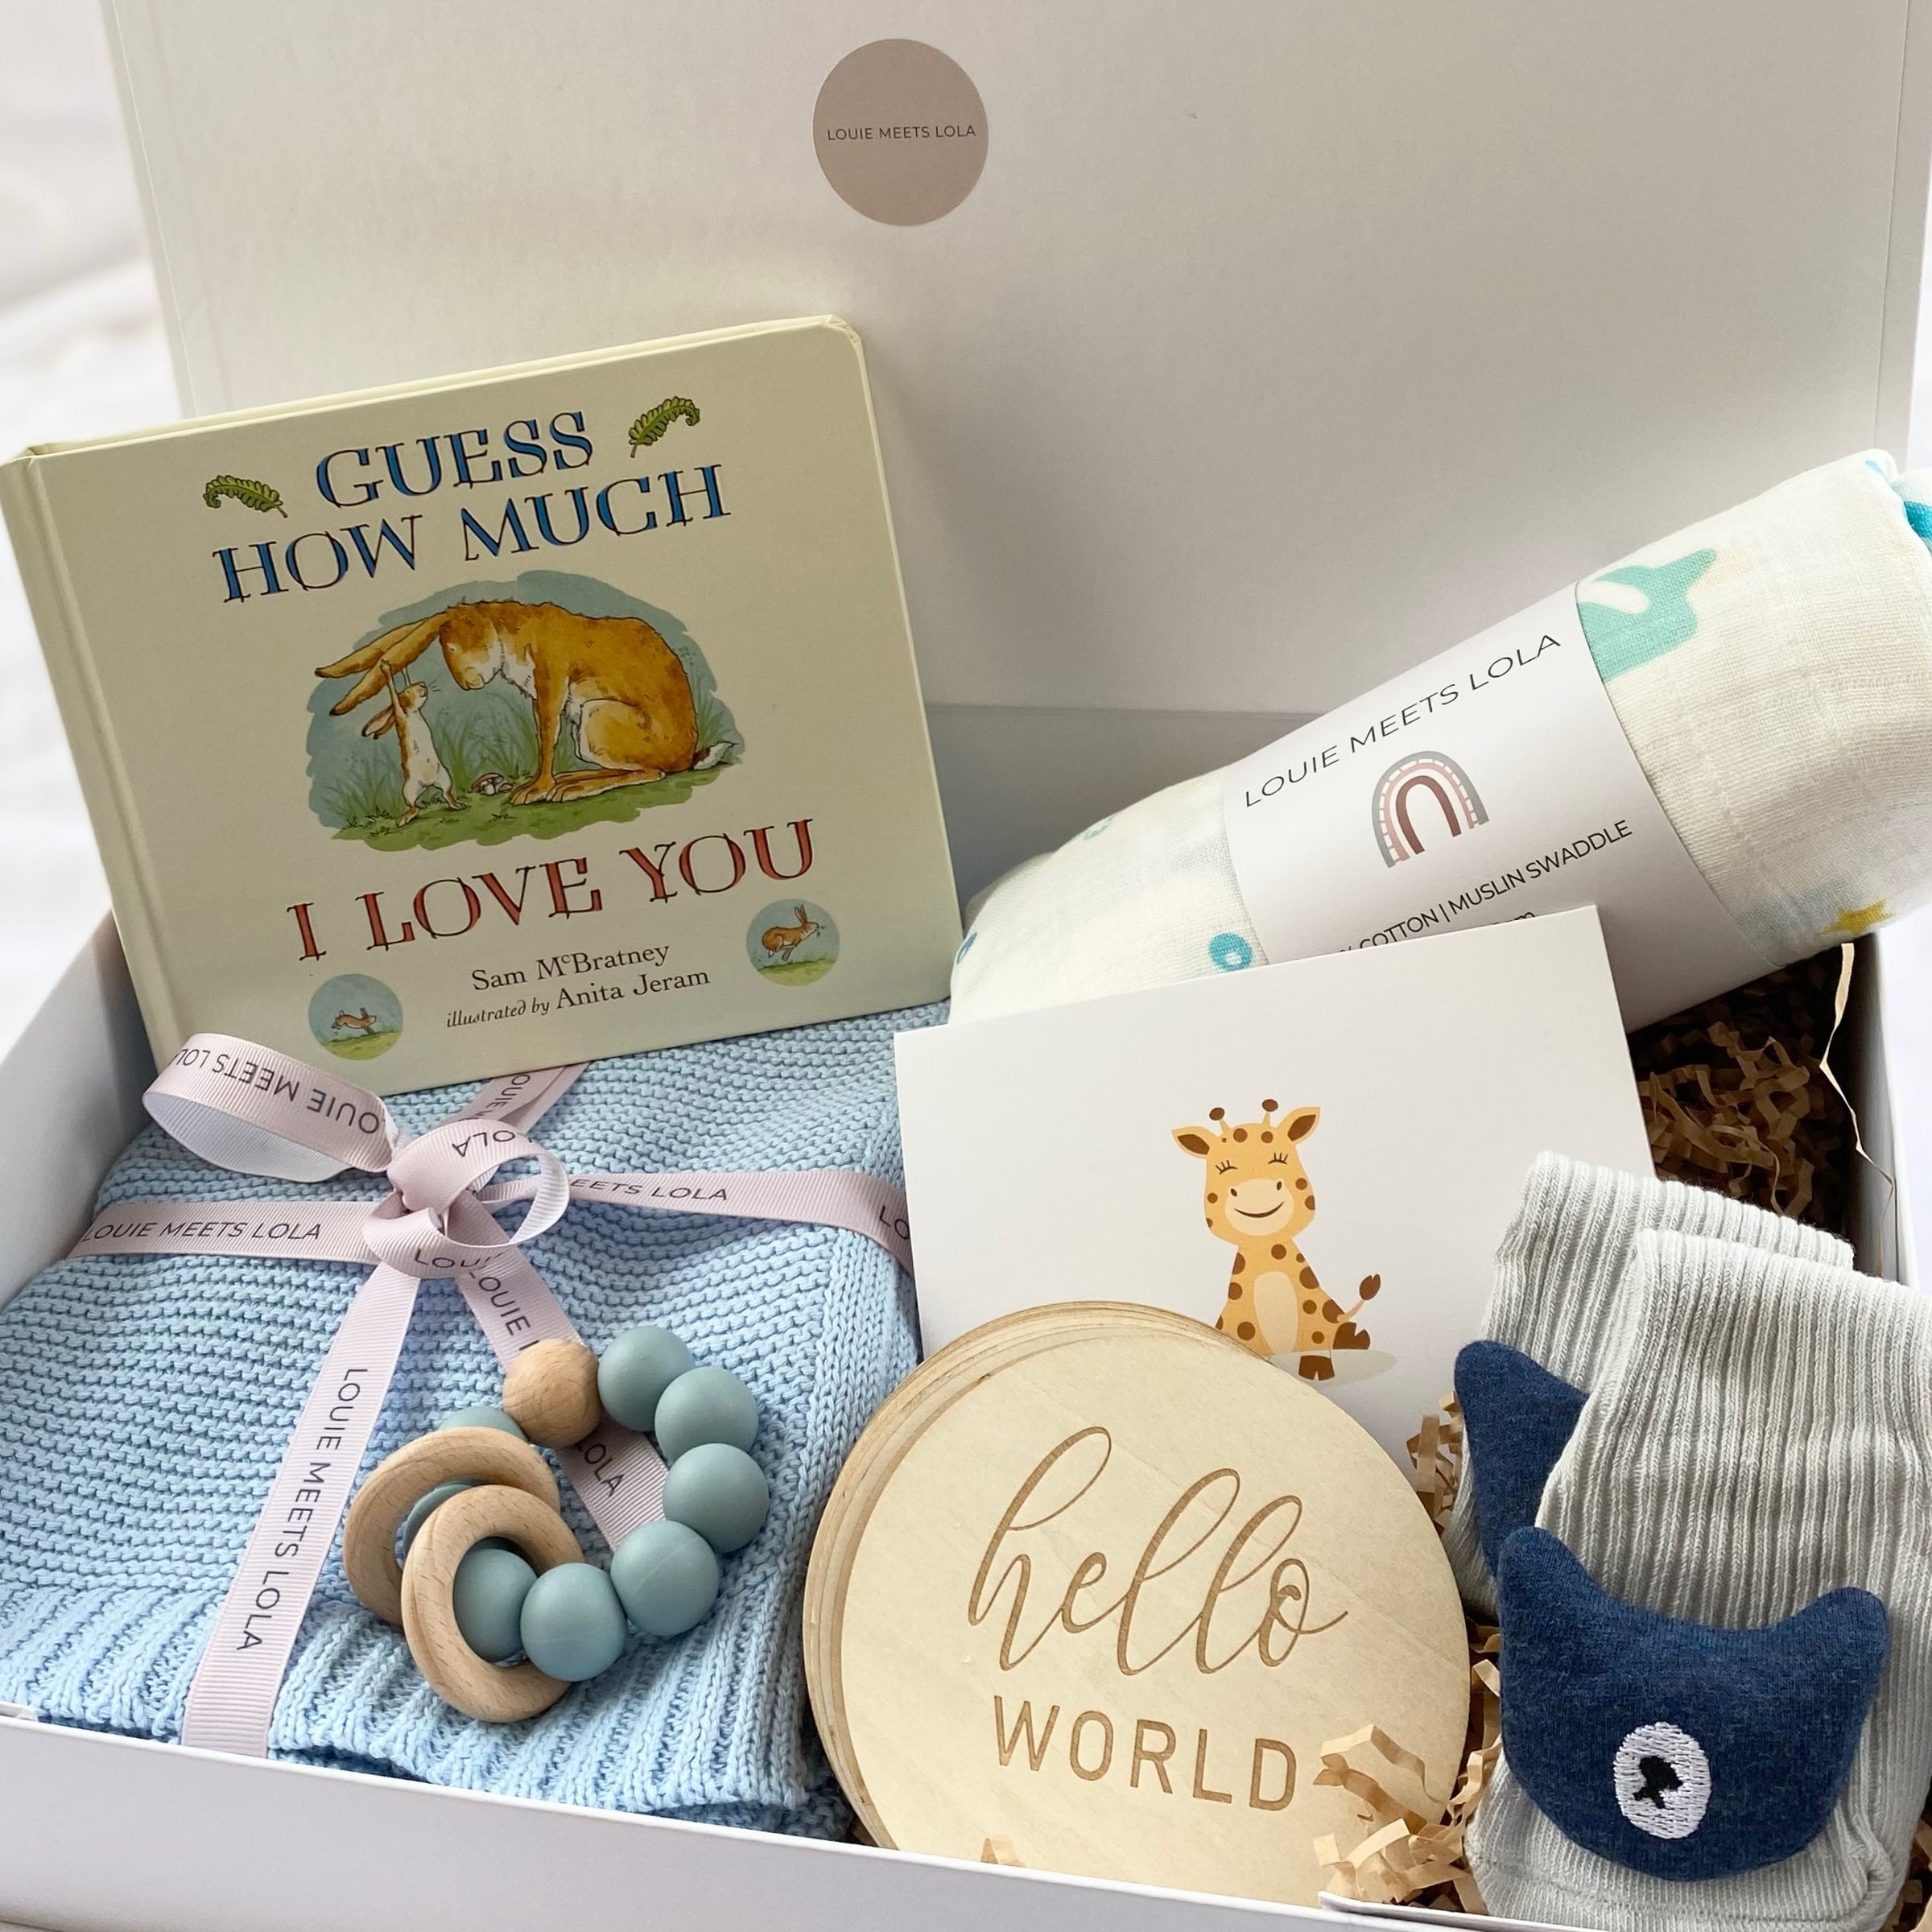 Packed with Love Gift Hamper - Blue - Buy Baby Gift Sets at Louie Meets Lola